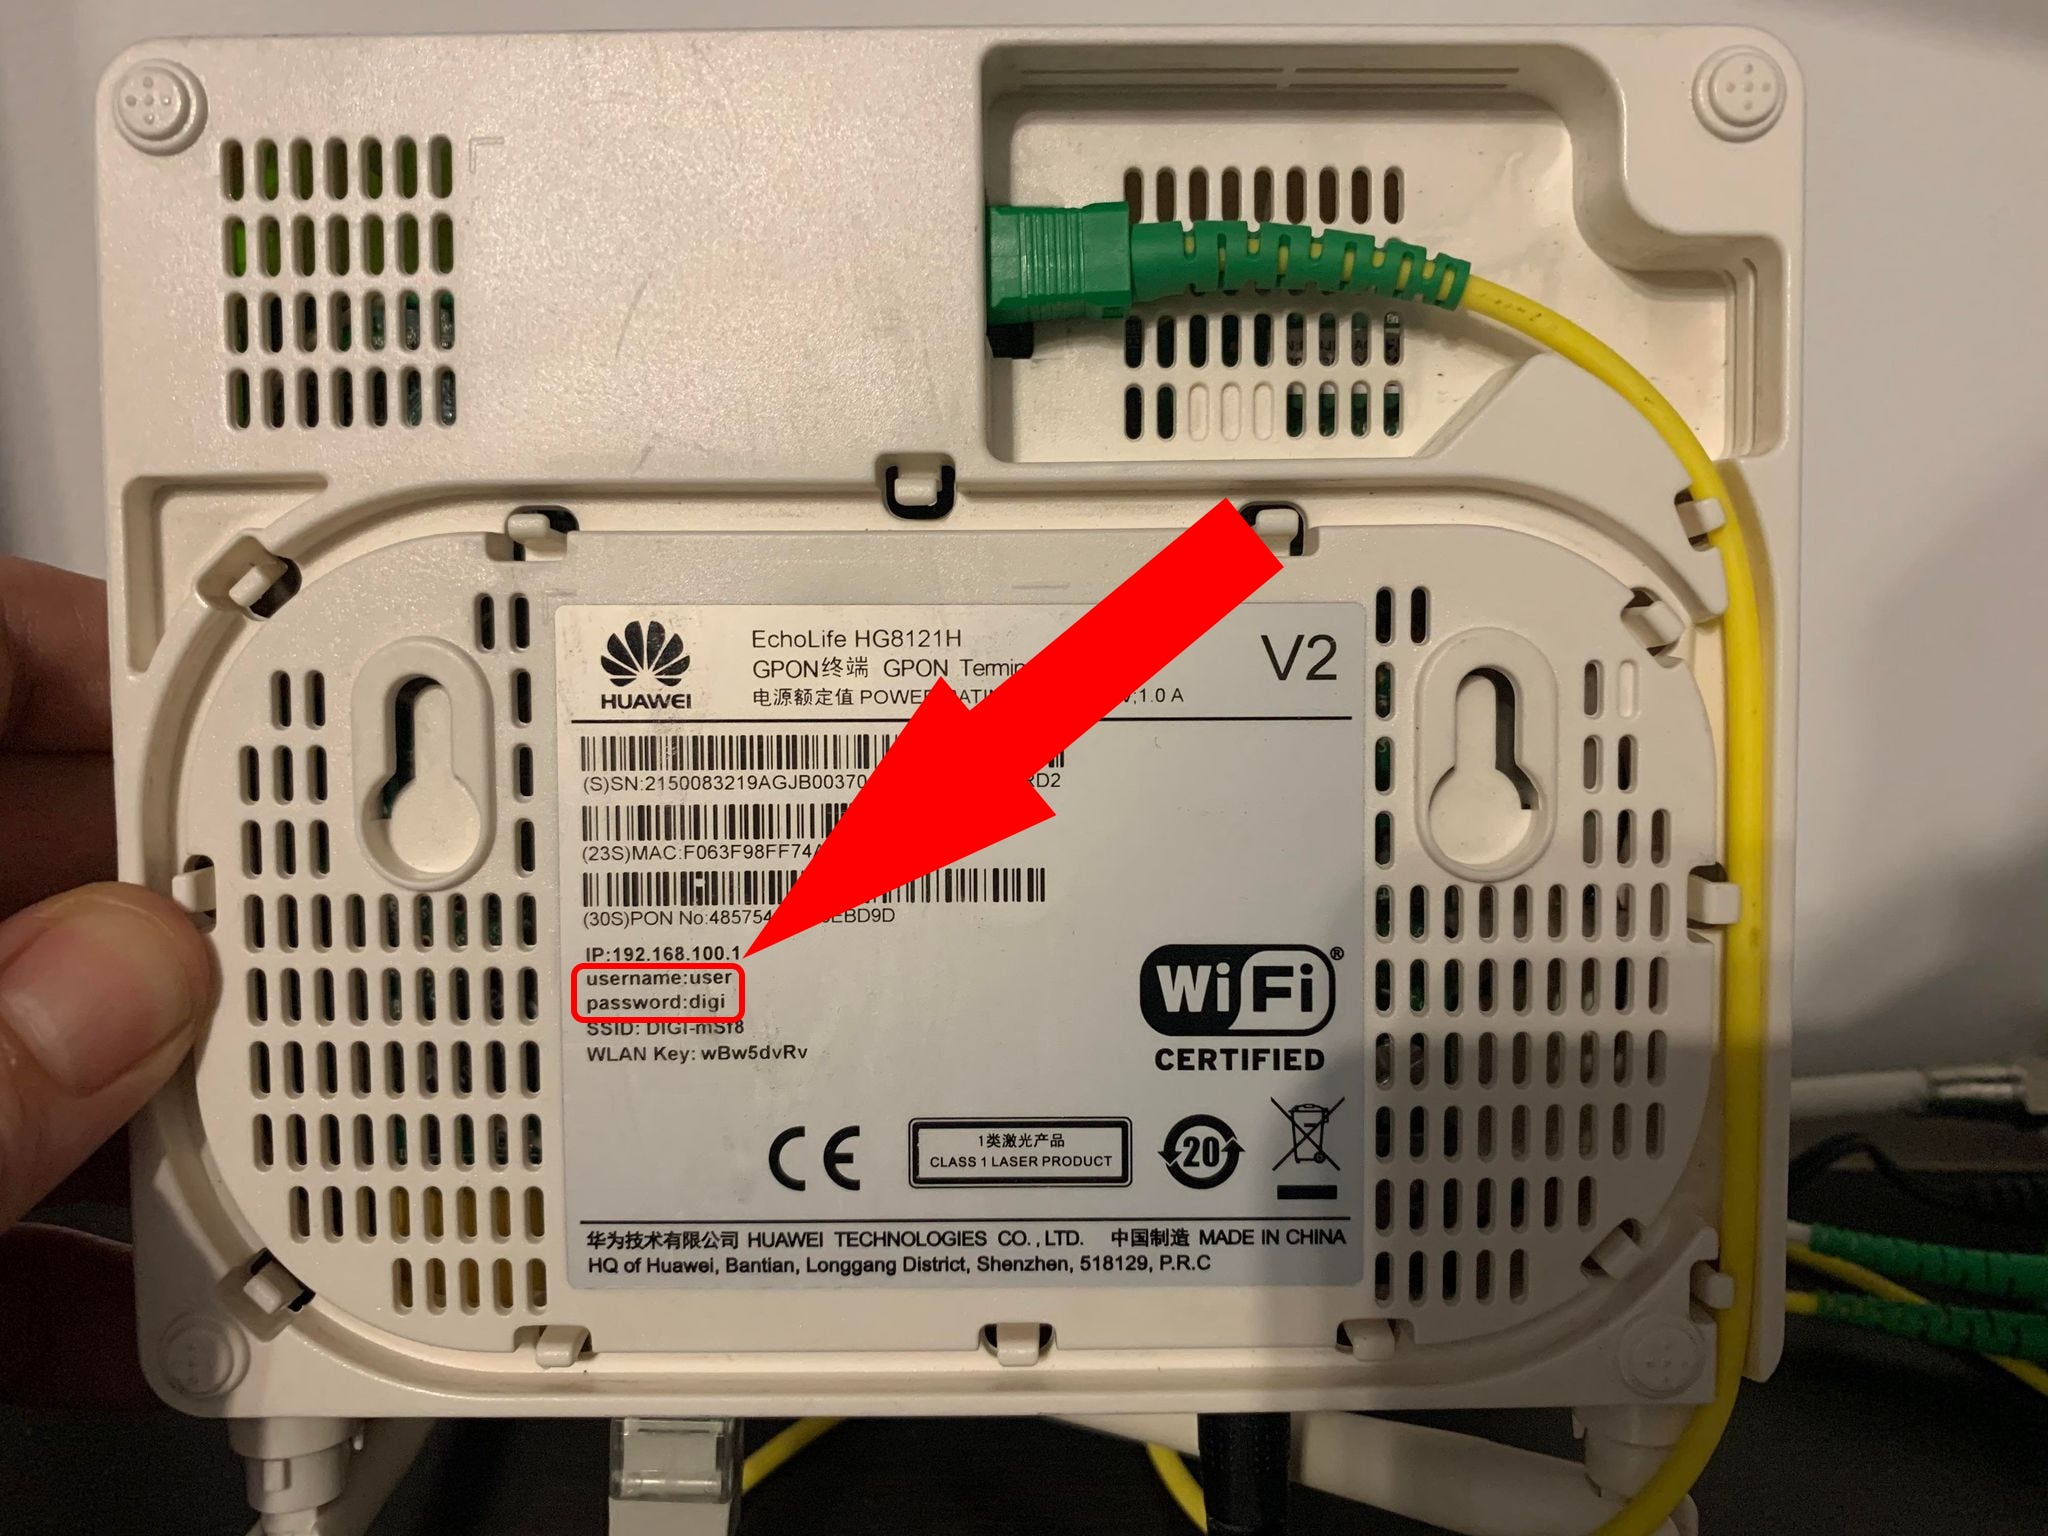 The bottom of the router, with the username and password highlighted.